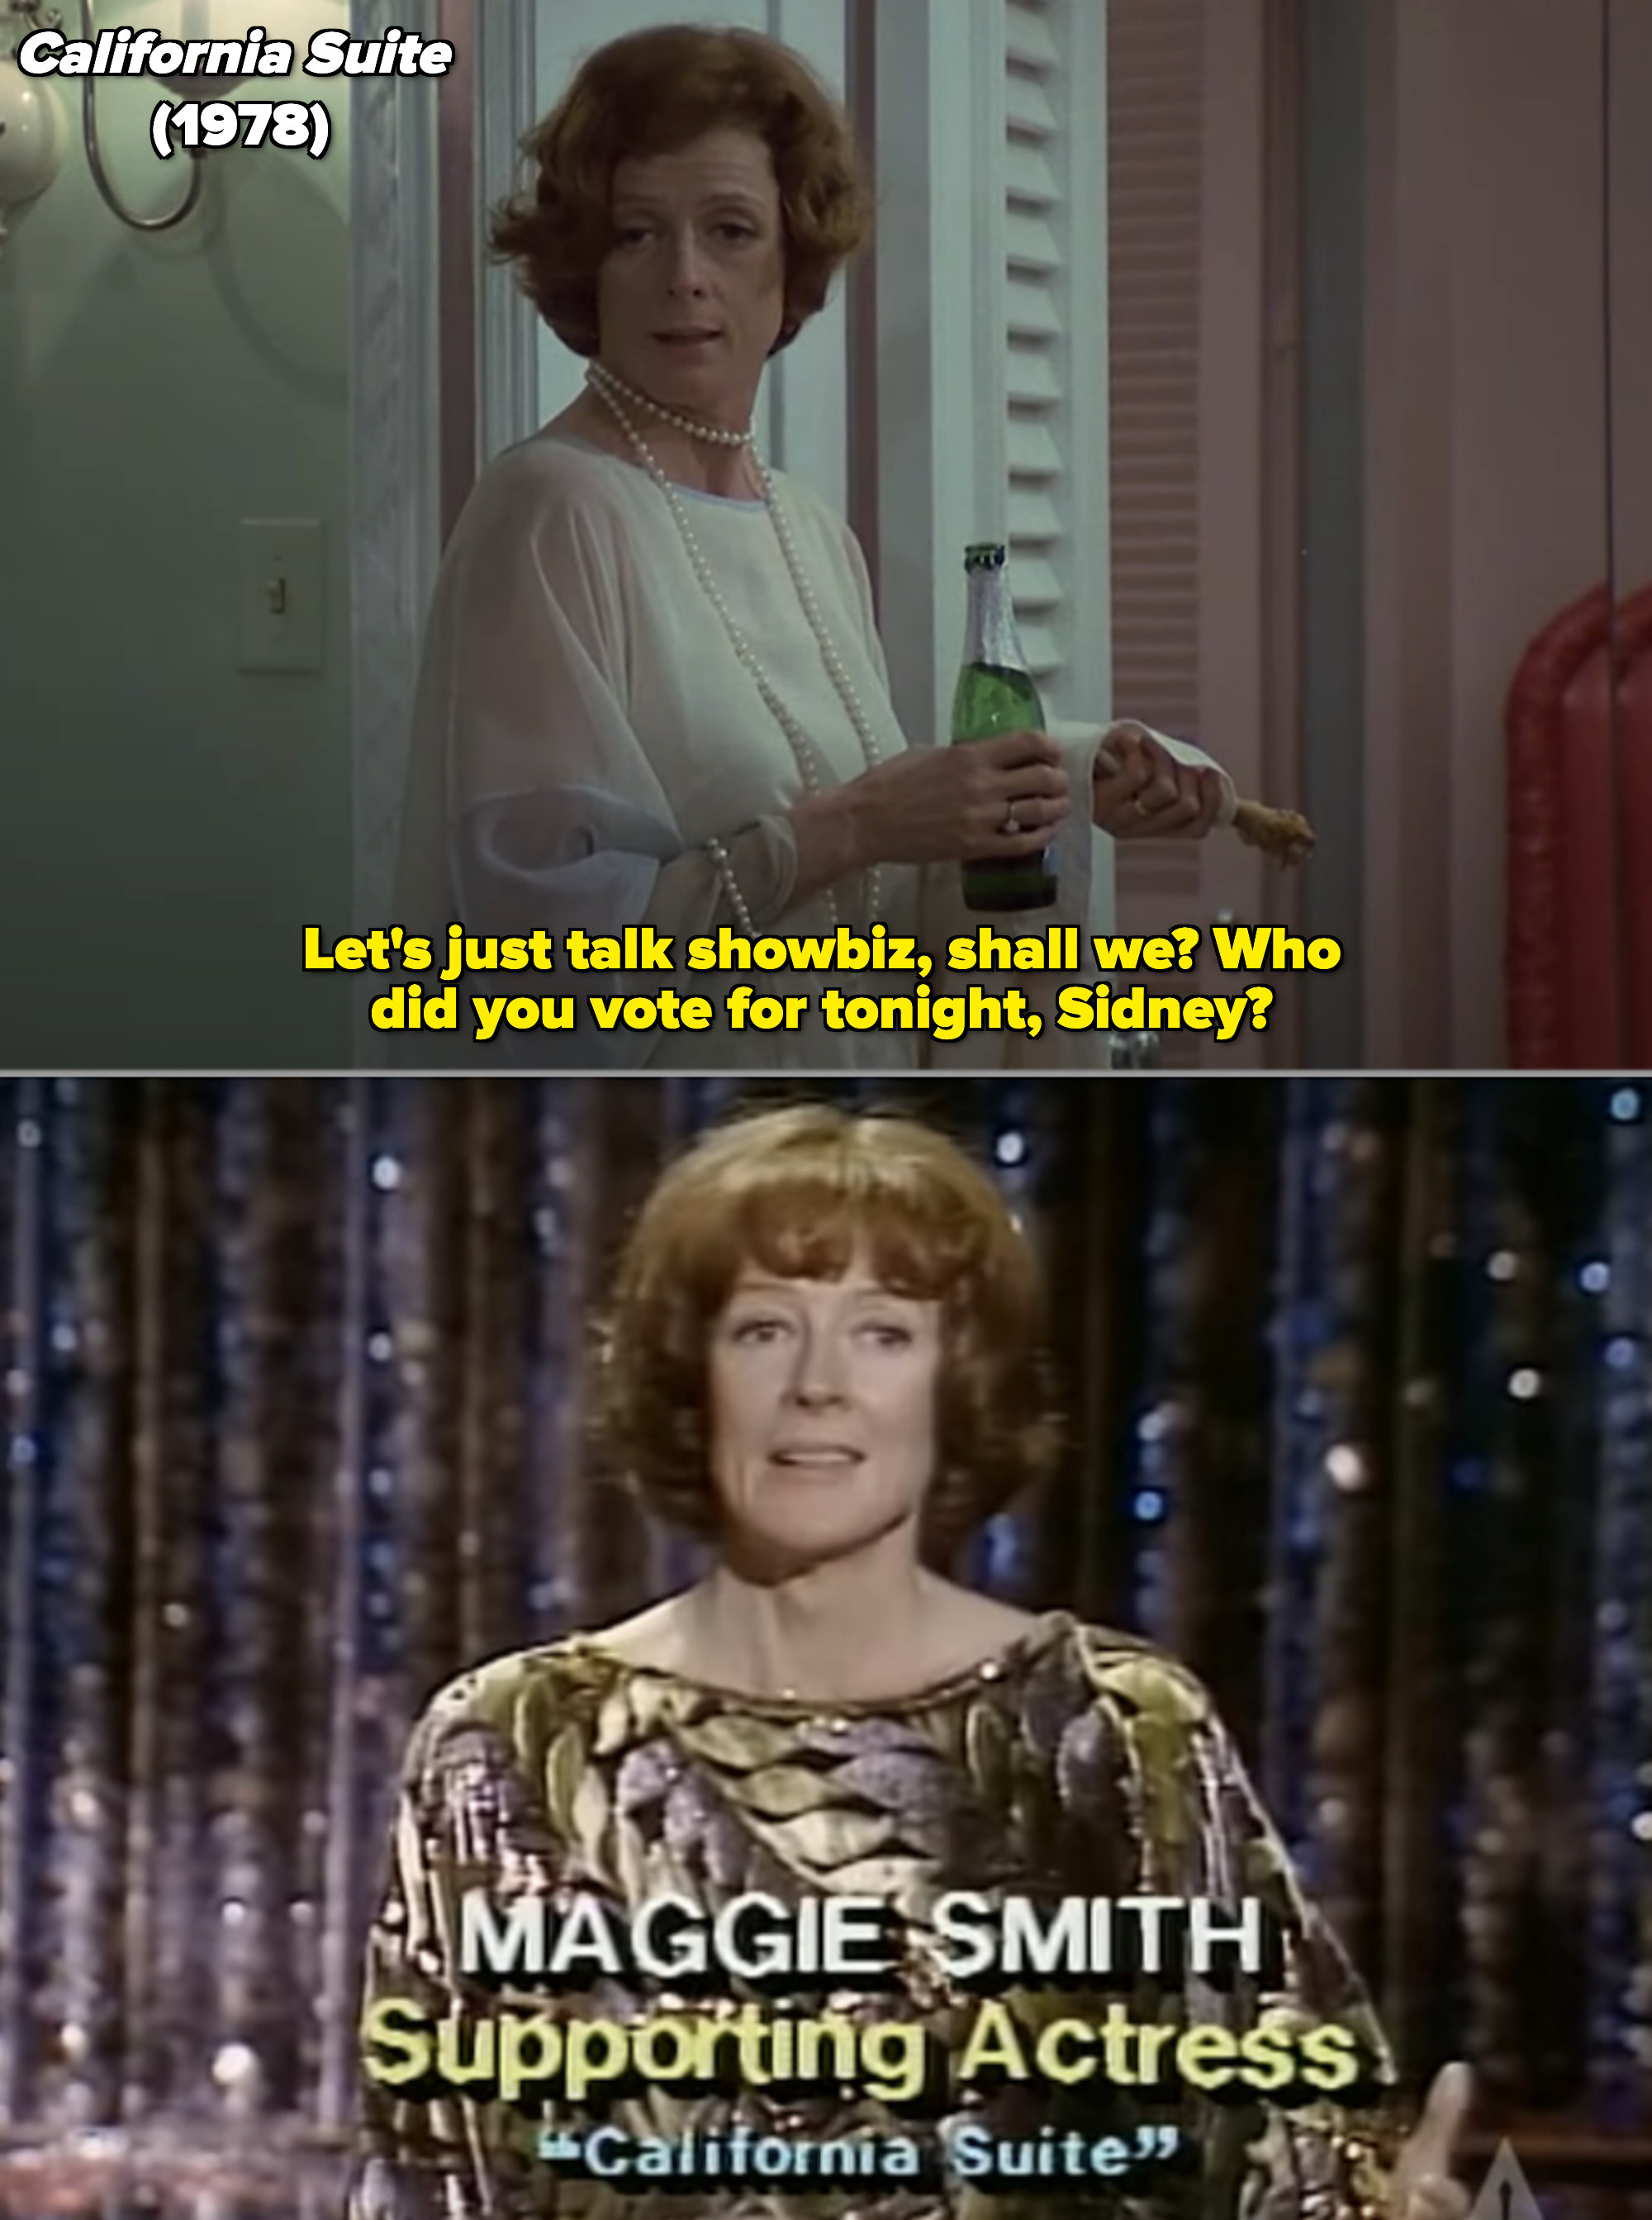 Maggie Smith in &quot;California Suite&quot; vs. her accepting her Oscar in 1979